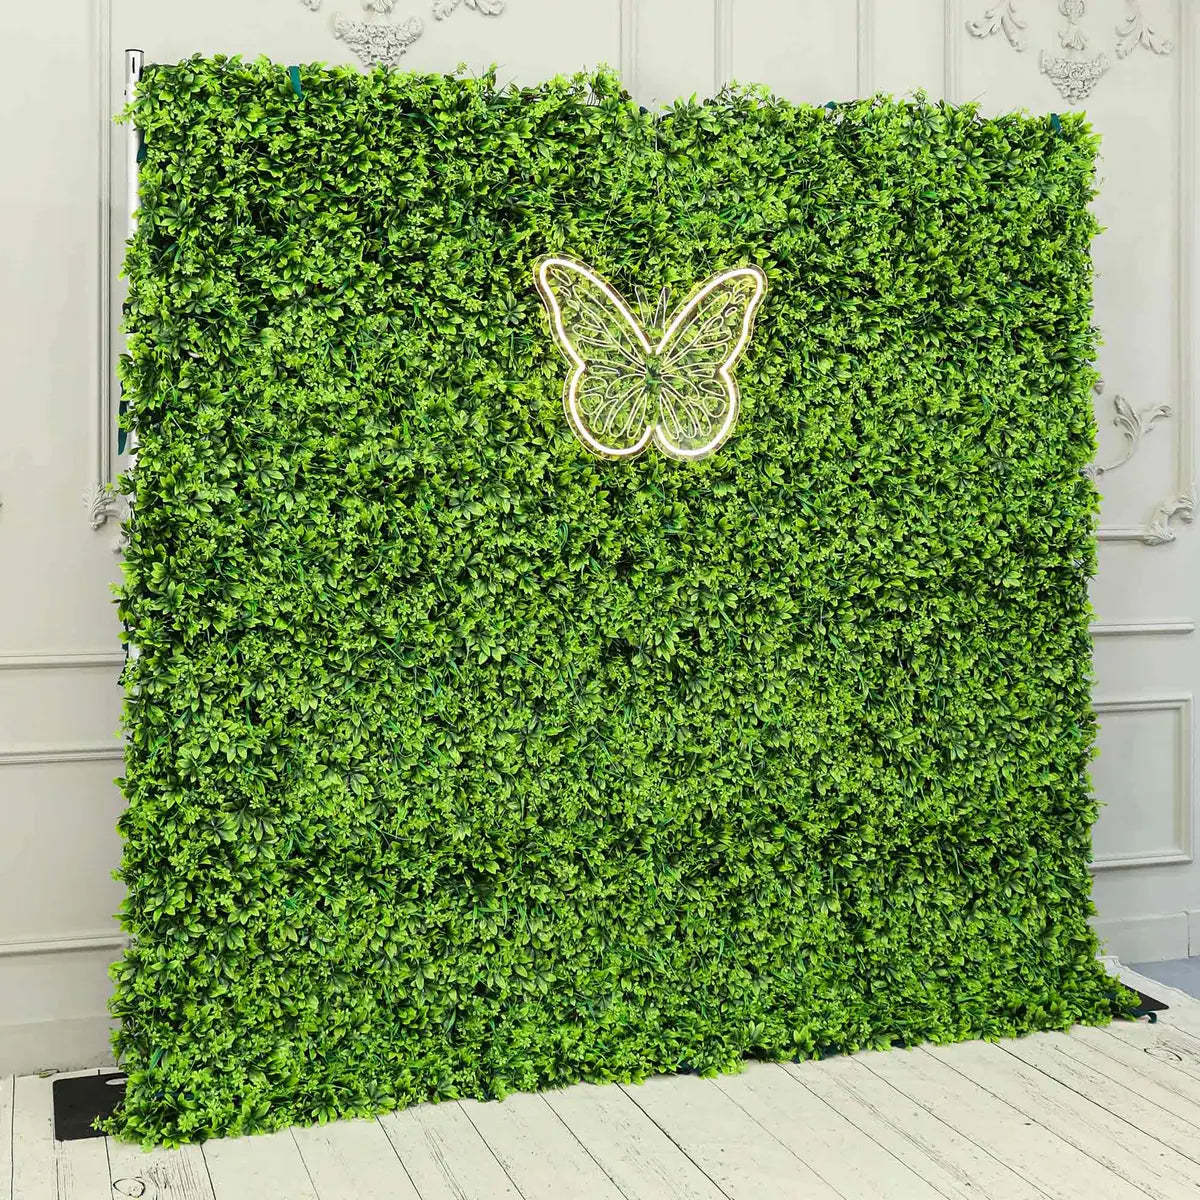 The green grass wall side view is designed for realism and durability with a fabric backing.